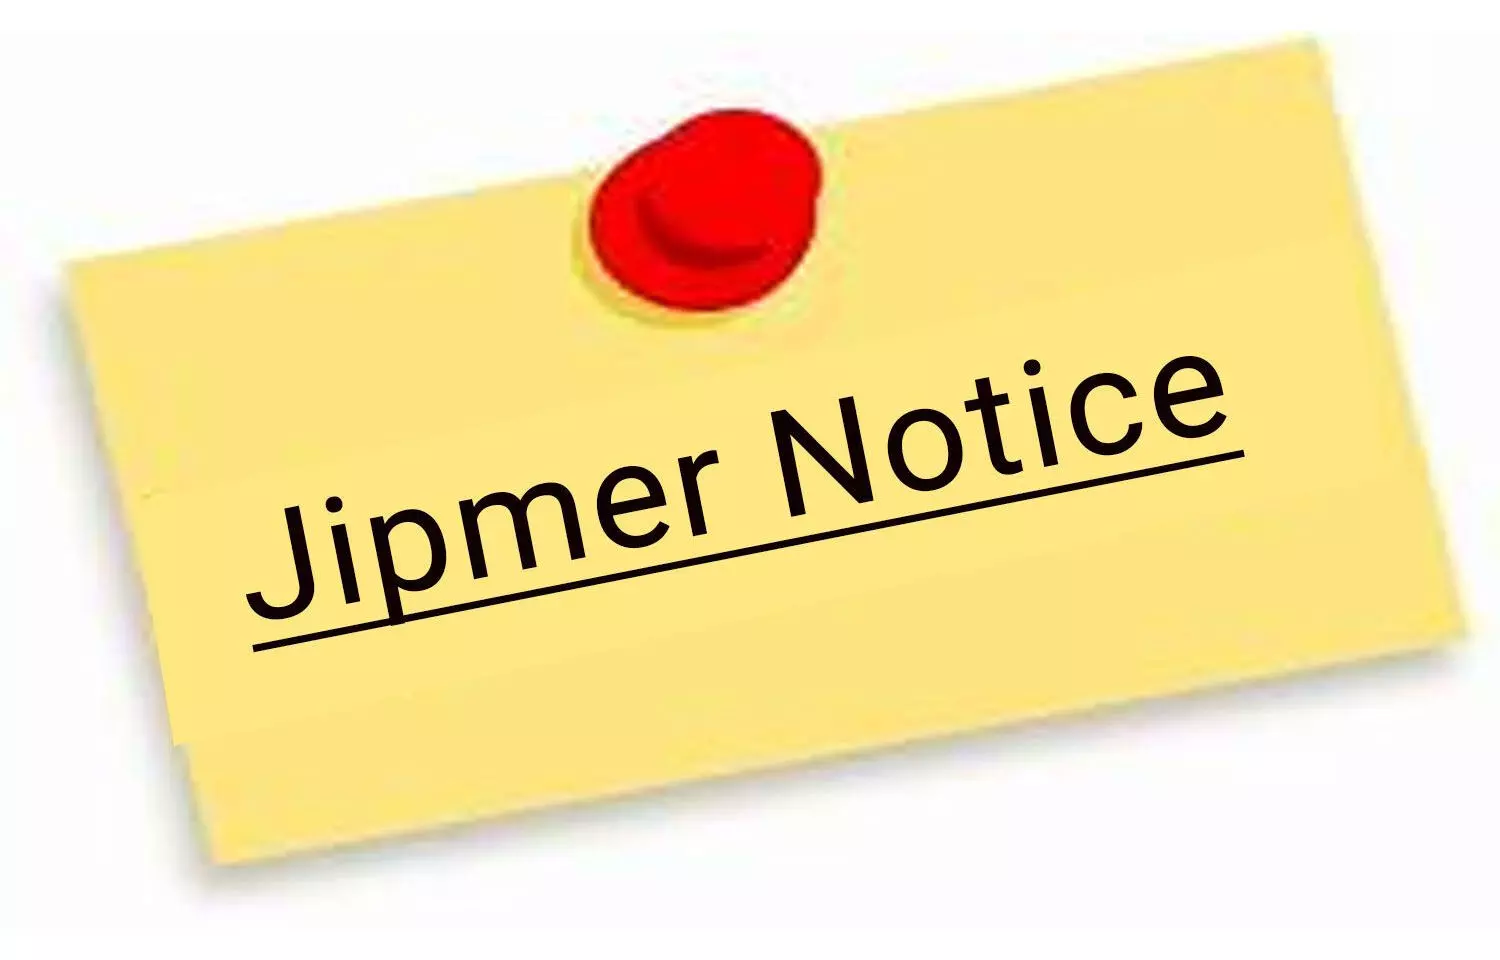 JIPMER invites applications for submission of proposals for approval from Institutional Committee for Stem Cell Research